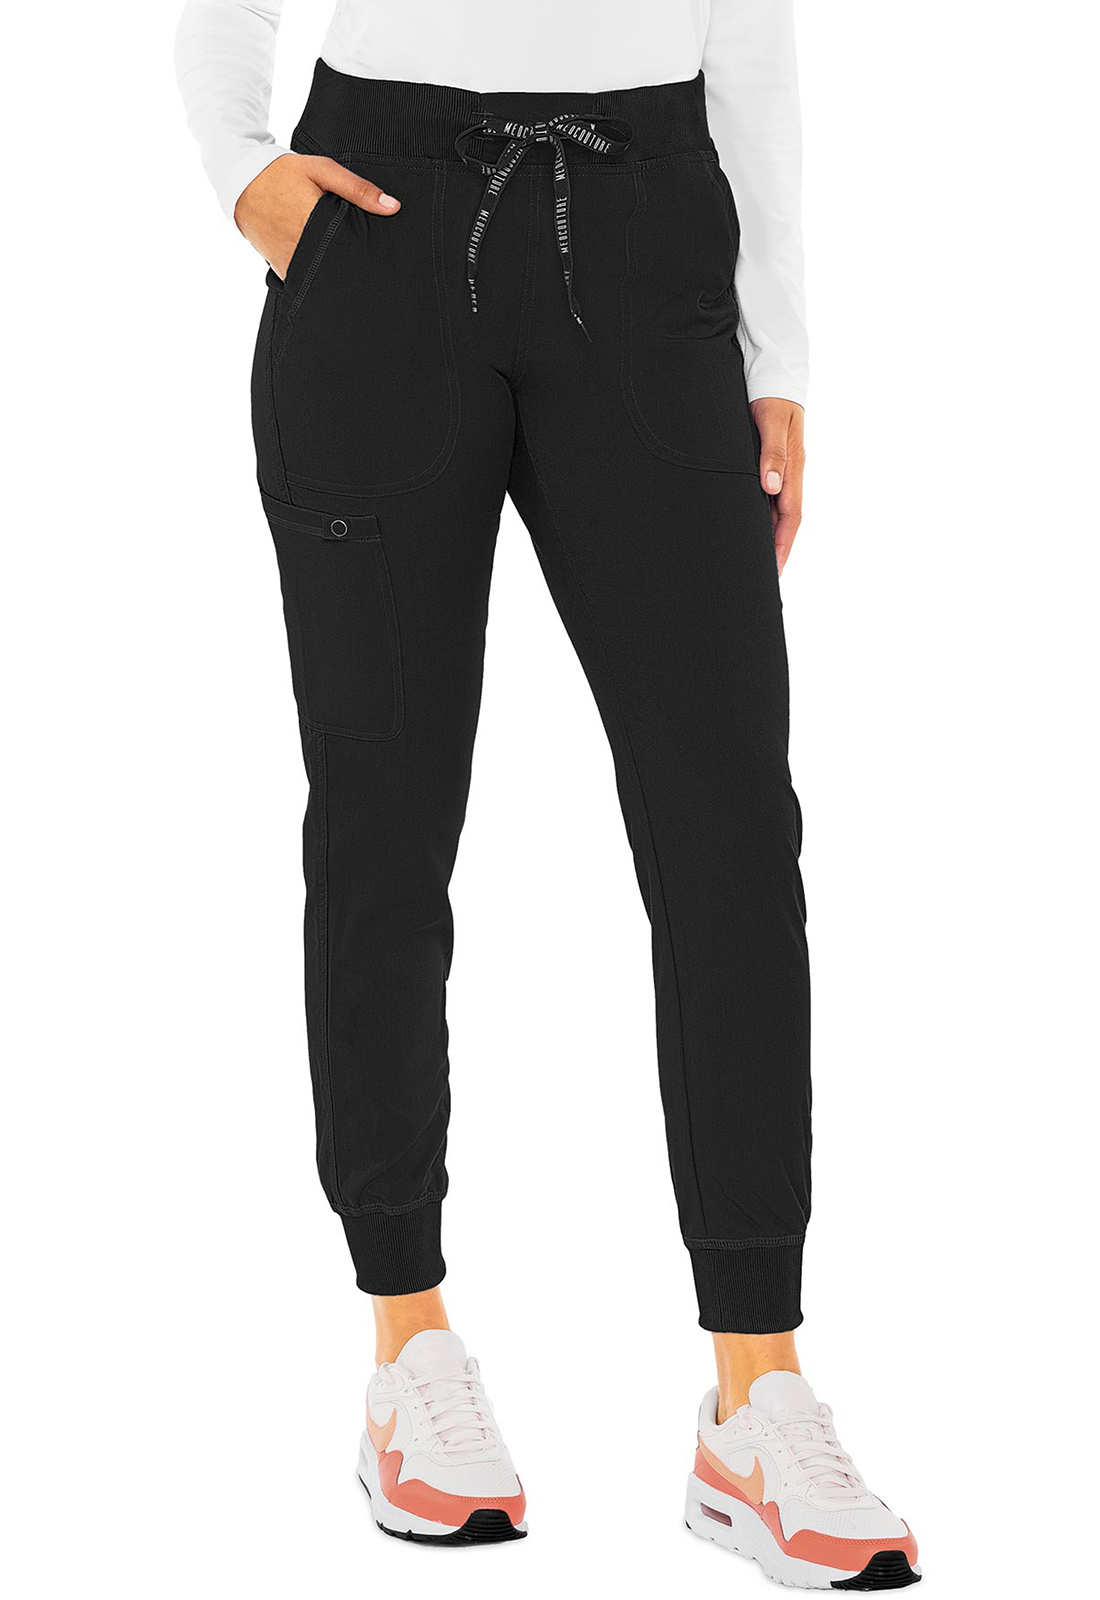 Med Couture MC Touch Jogger Yoga Pant-